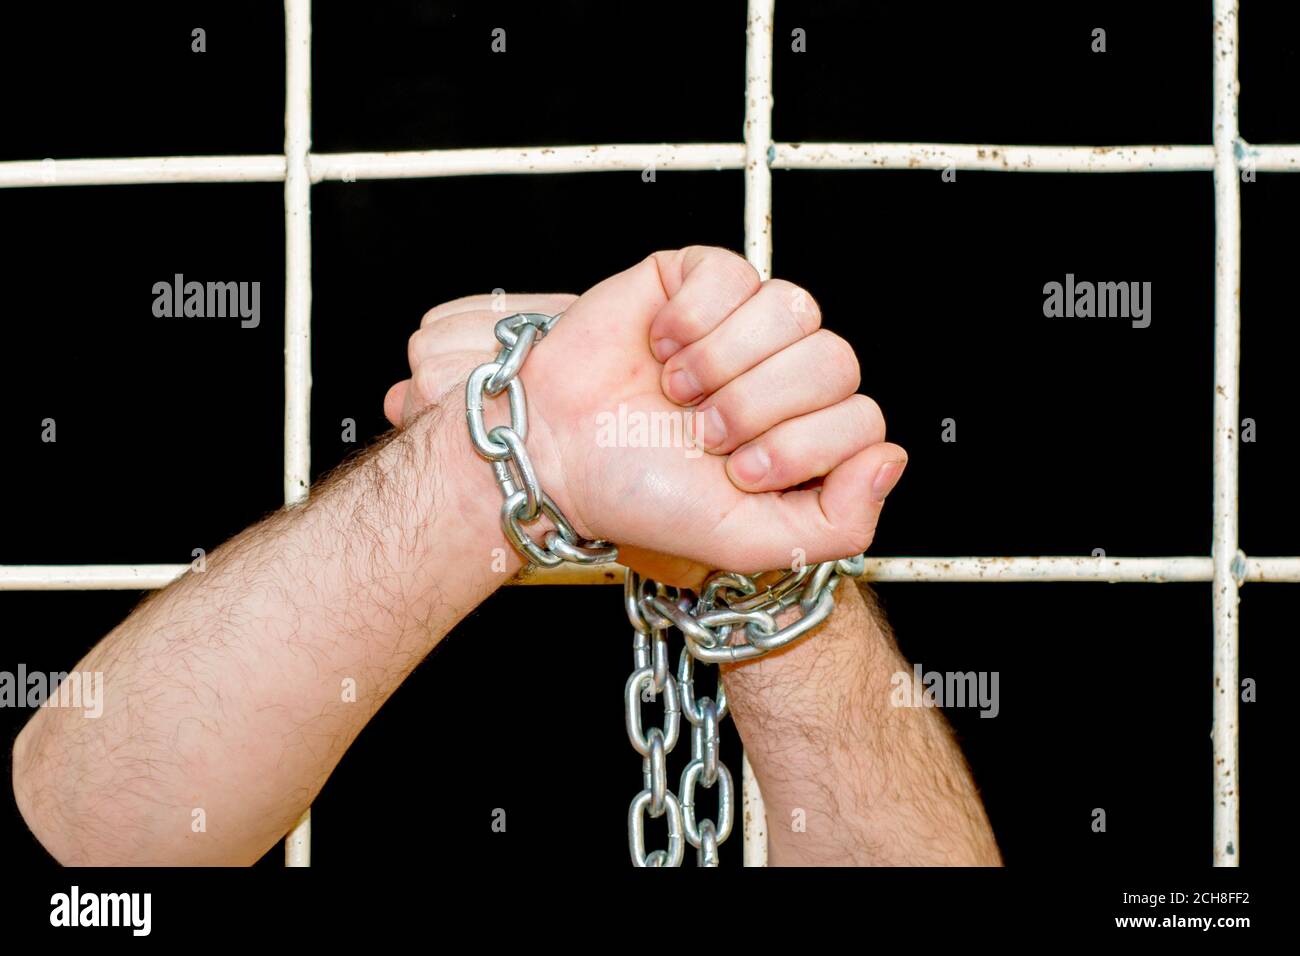 Quarantine Pandemic Restriction Concept Chained Hands Behind Iron Bars Stock Photo